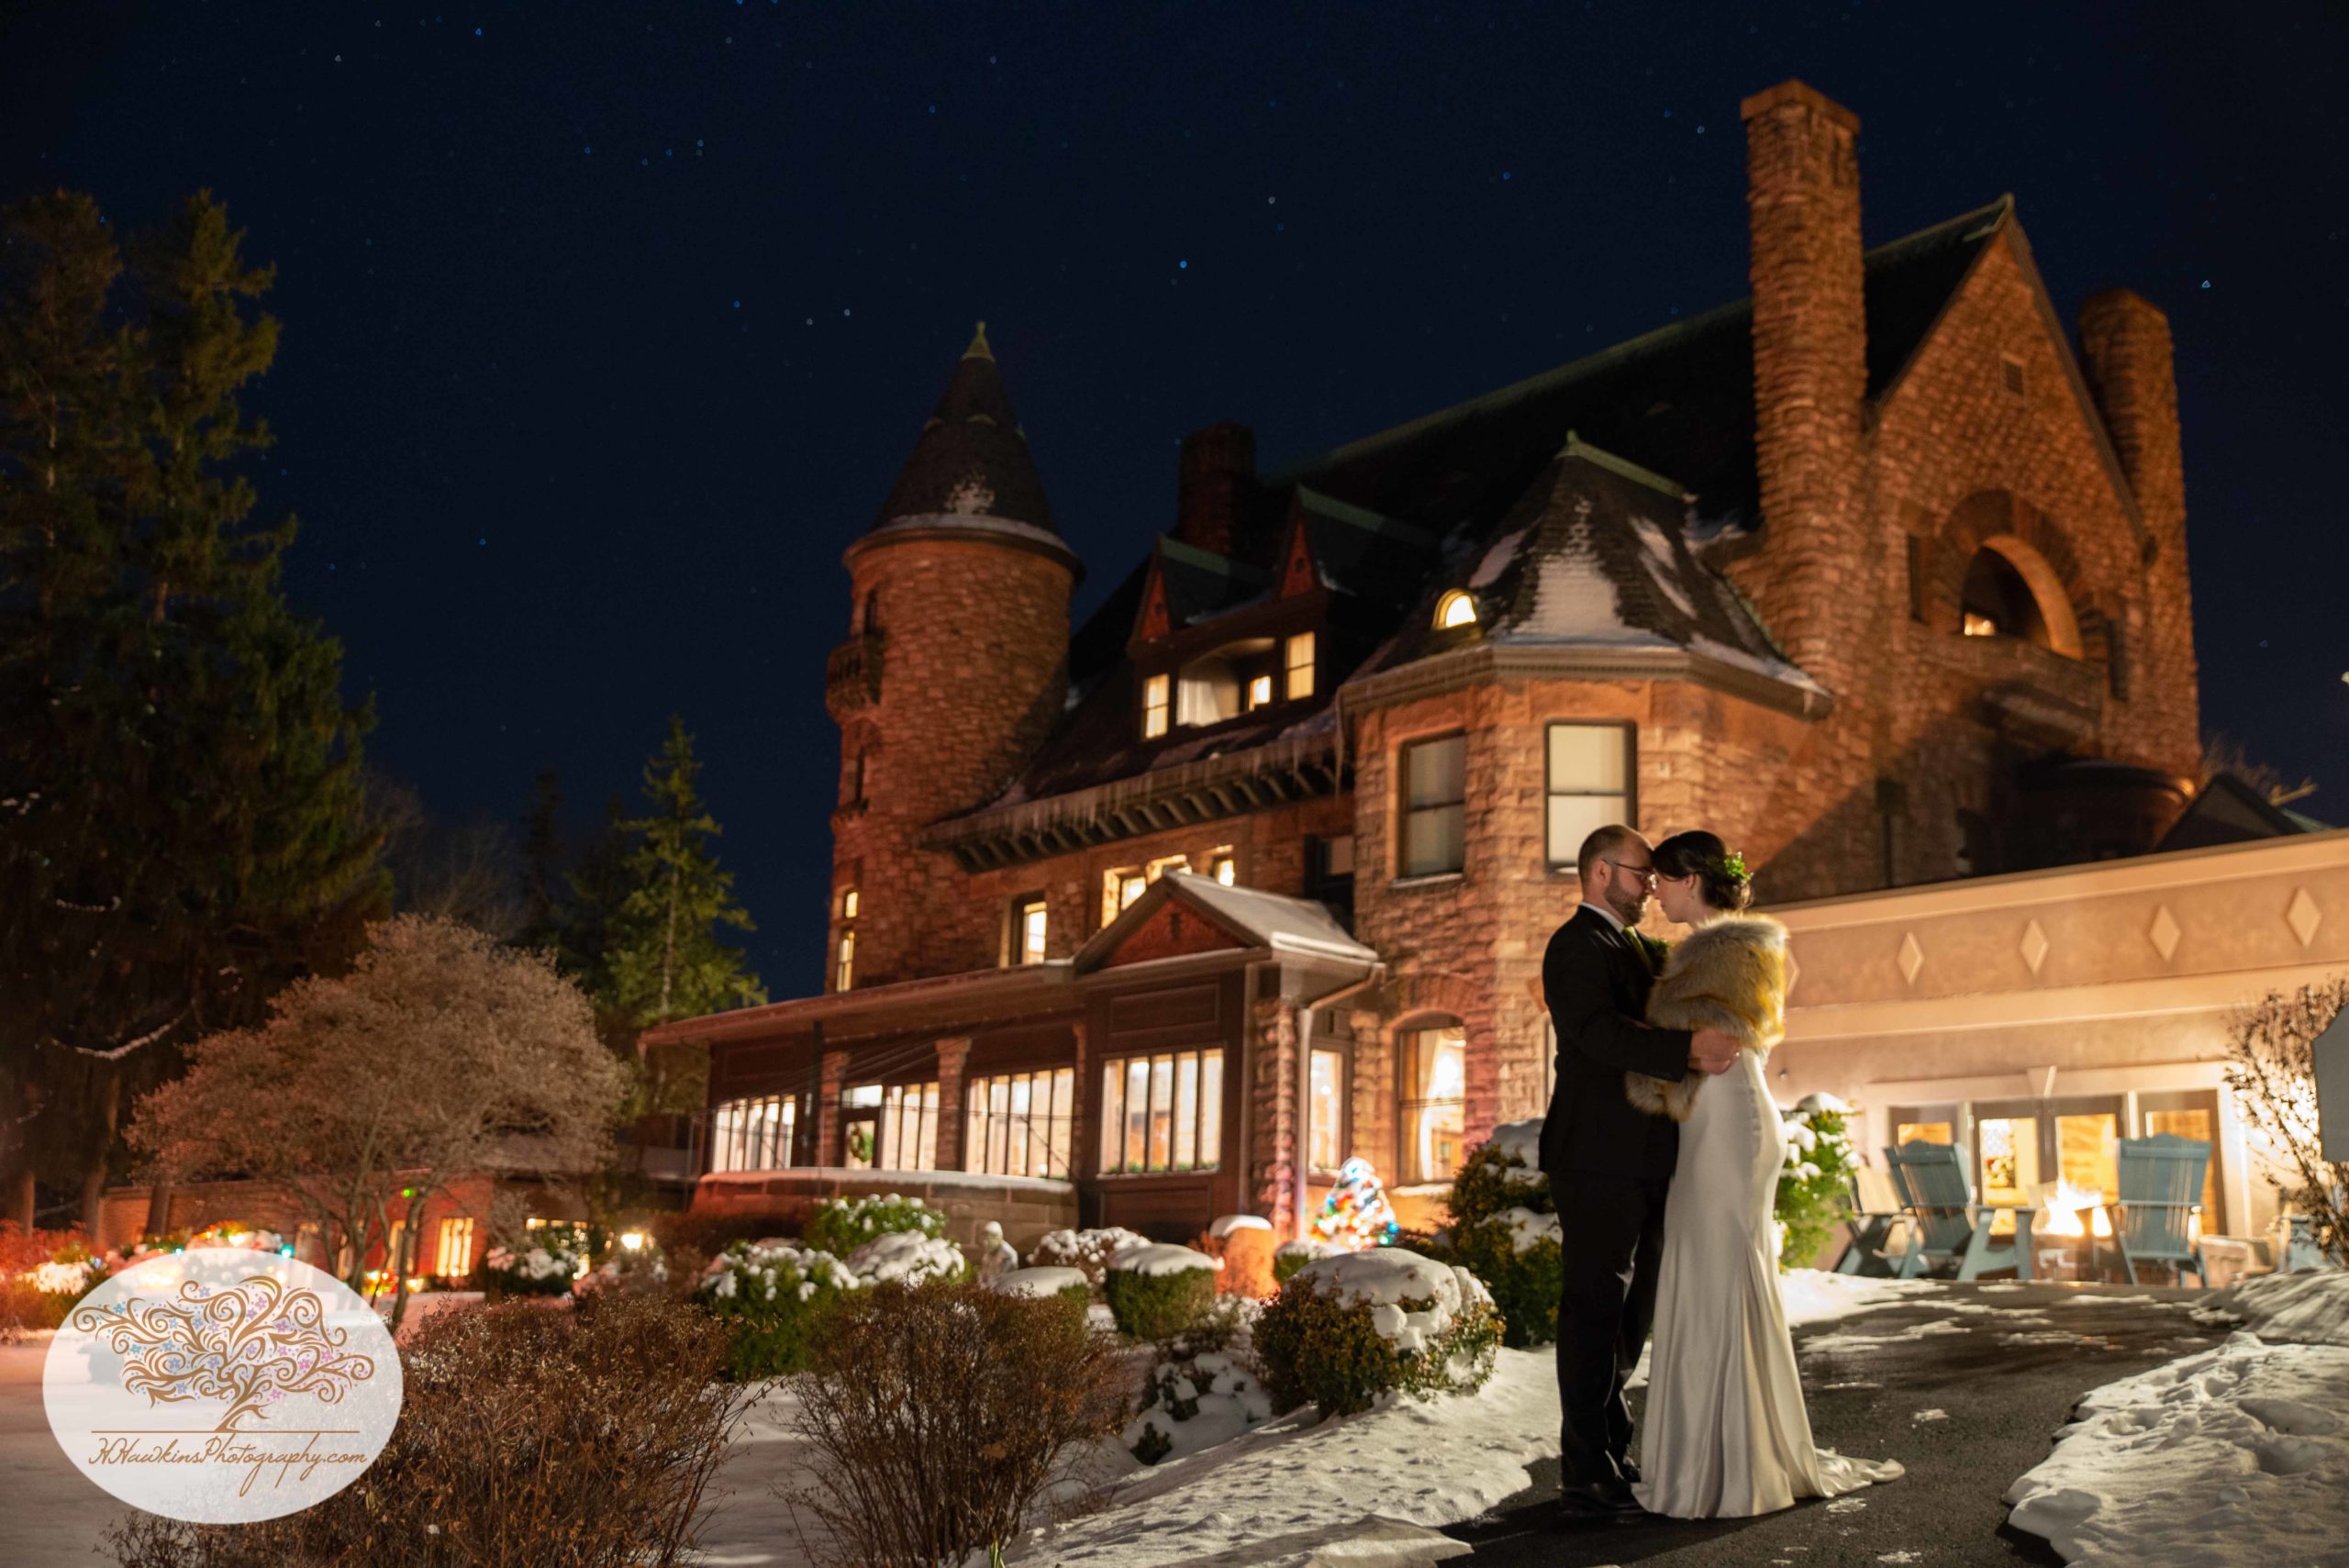 Belhurst Castle at night with bride and groom in front